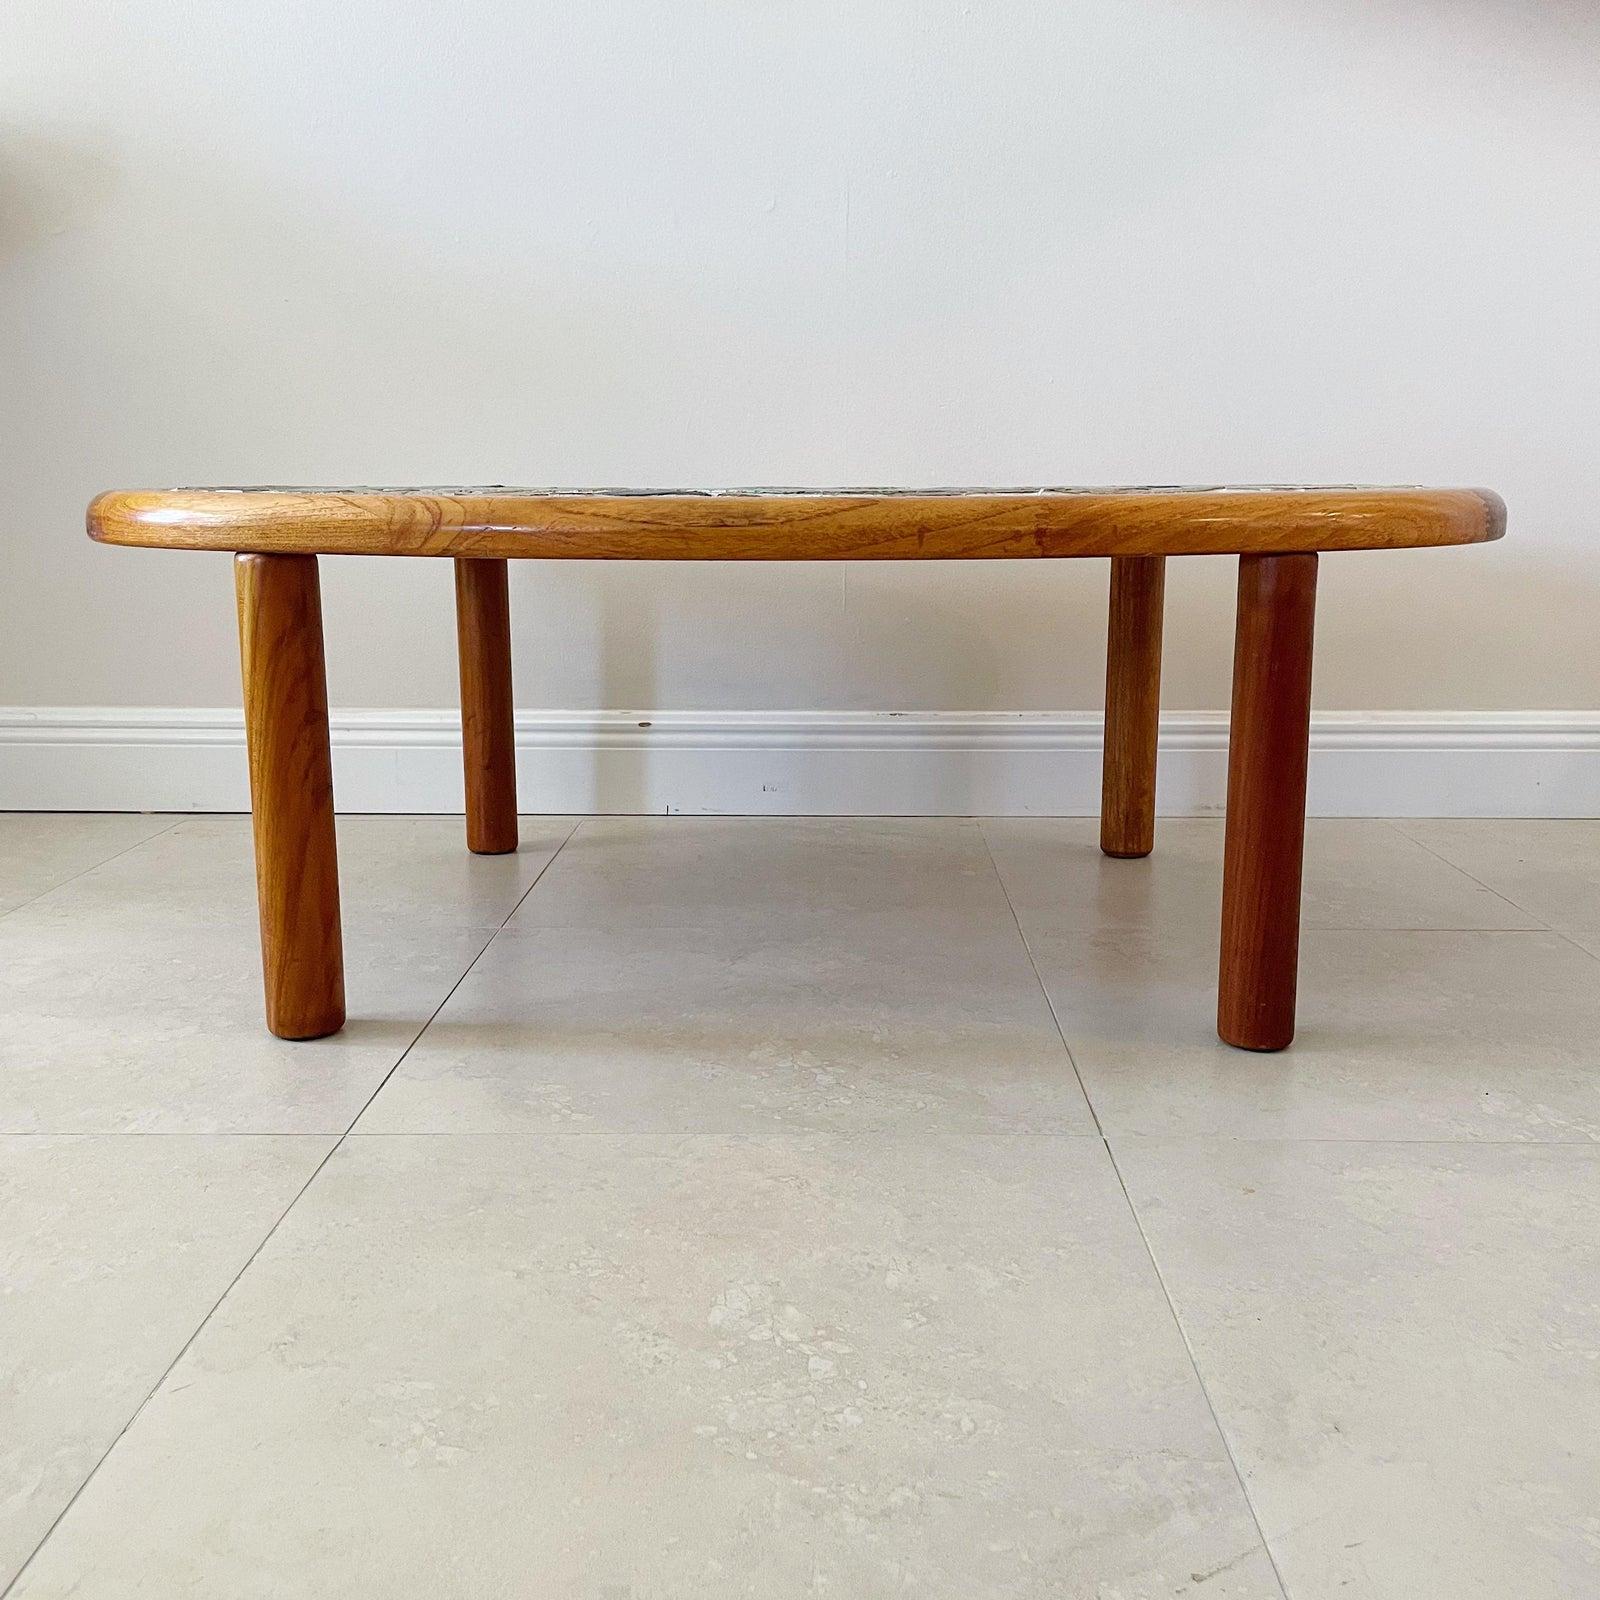 Danish modern handcrafted Tue Poulsen coffee cocktail table for Haslev Møbelsnedkeri A/S, Denmark. The table is an oval shape and crafted in teak with inset with incised, hand painted glazed ceramic tiles in various colors. With signature to tile